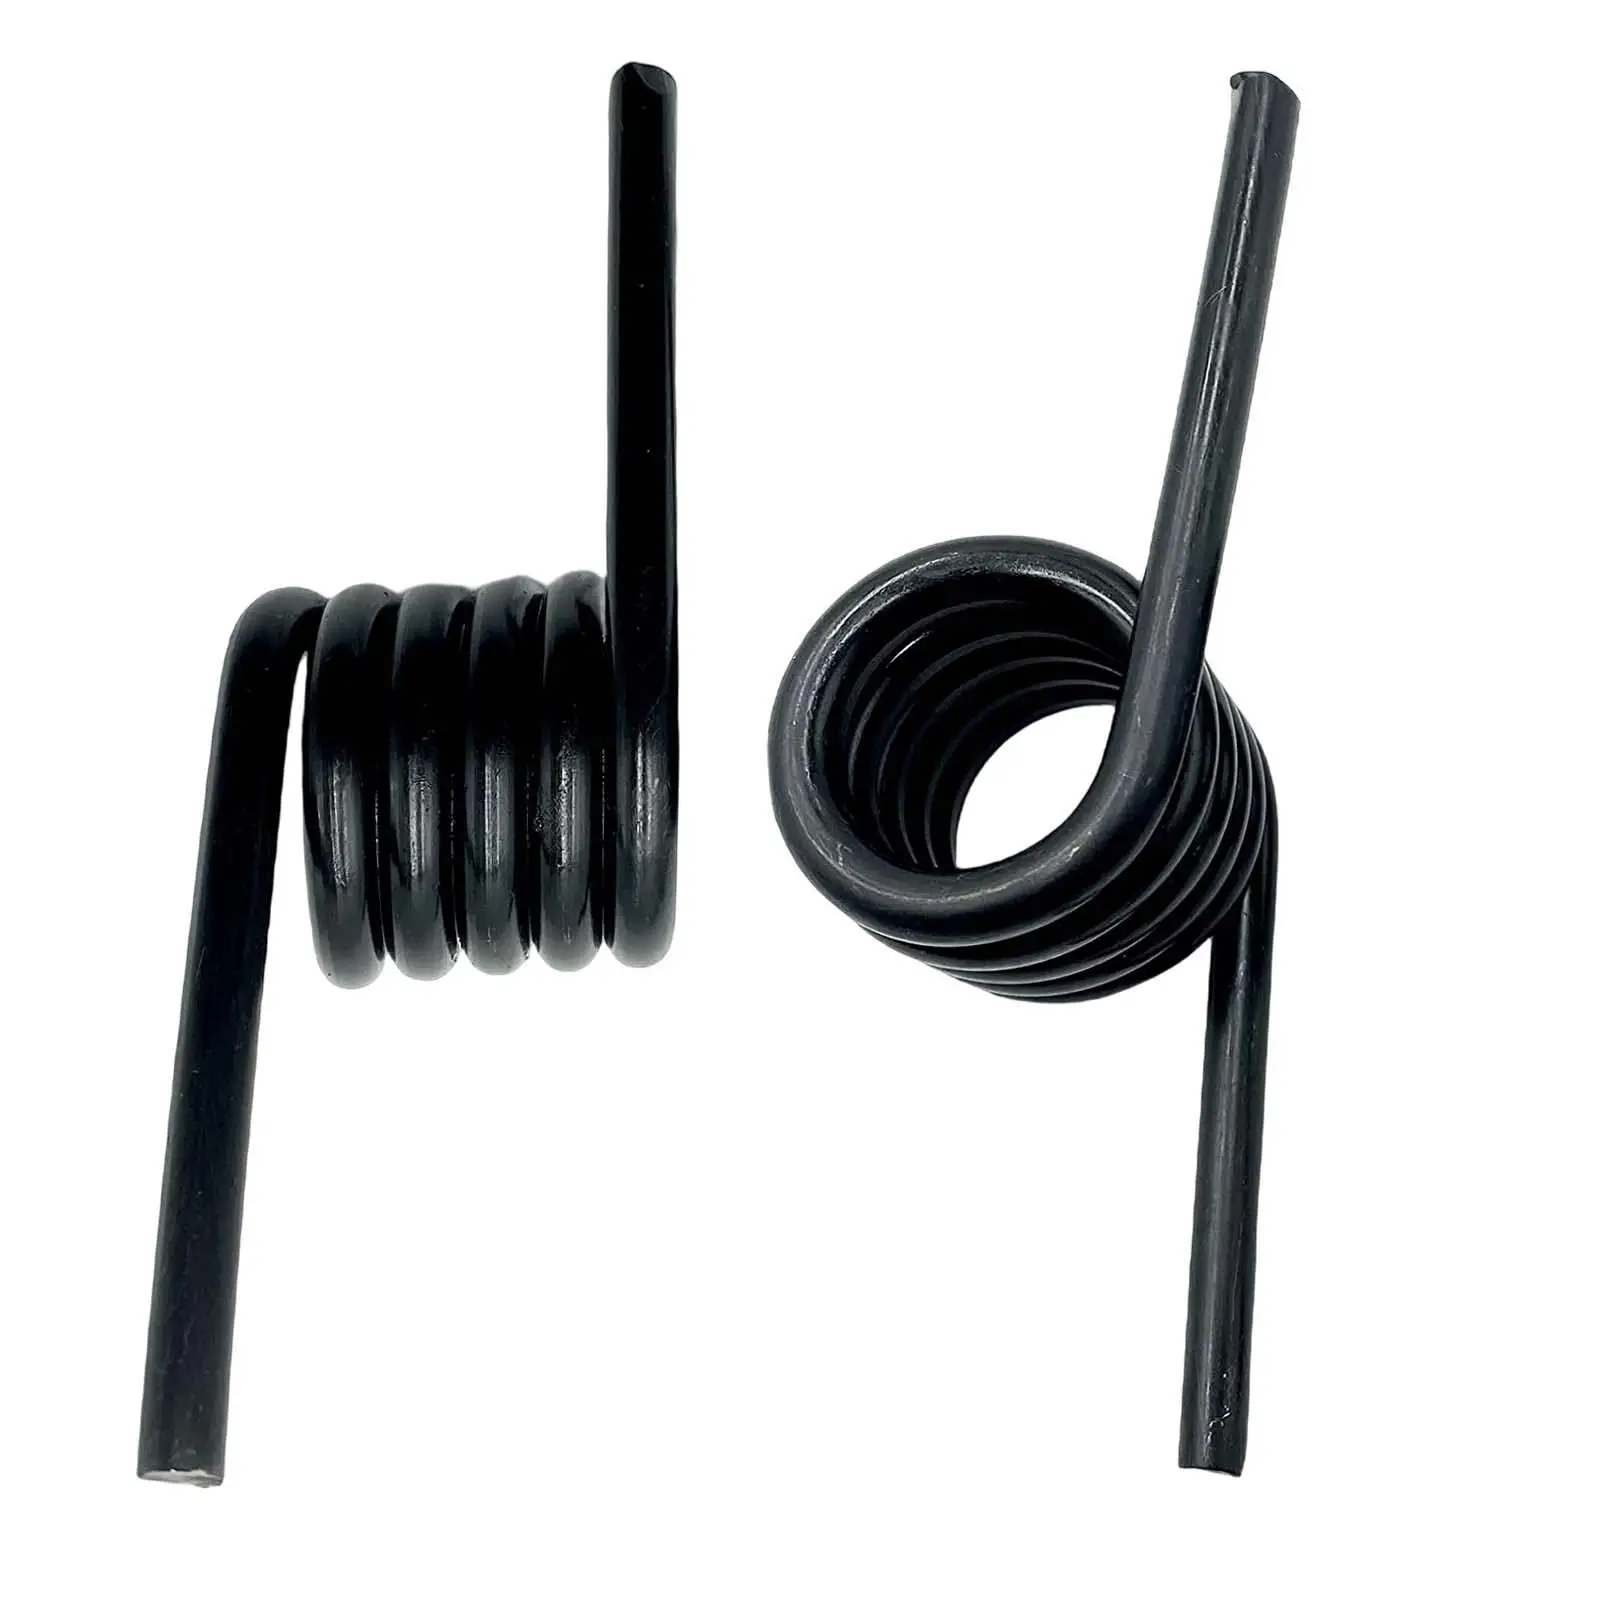 2Pcs Torsion Ramp Spring 3034278 Left & Right Hand Black Replacement Part High Strength for Trailer Ramps Durable Professional